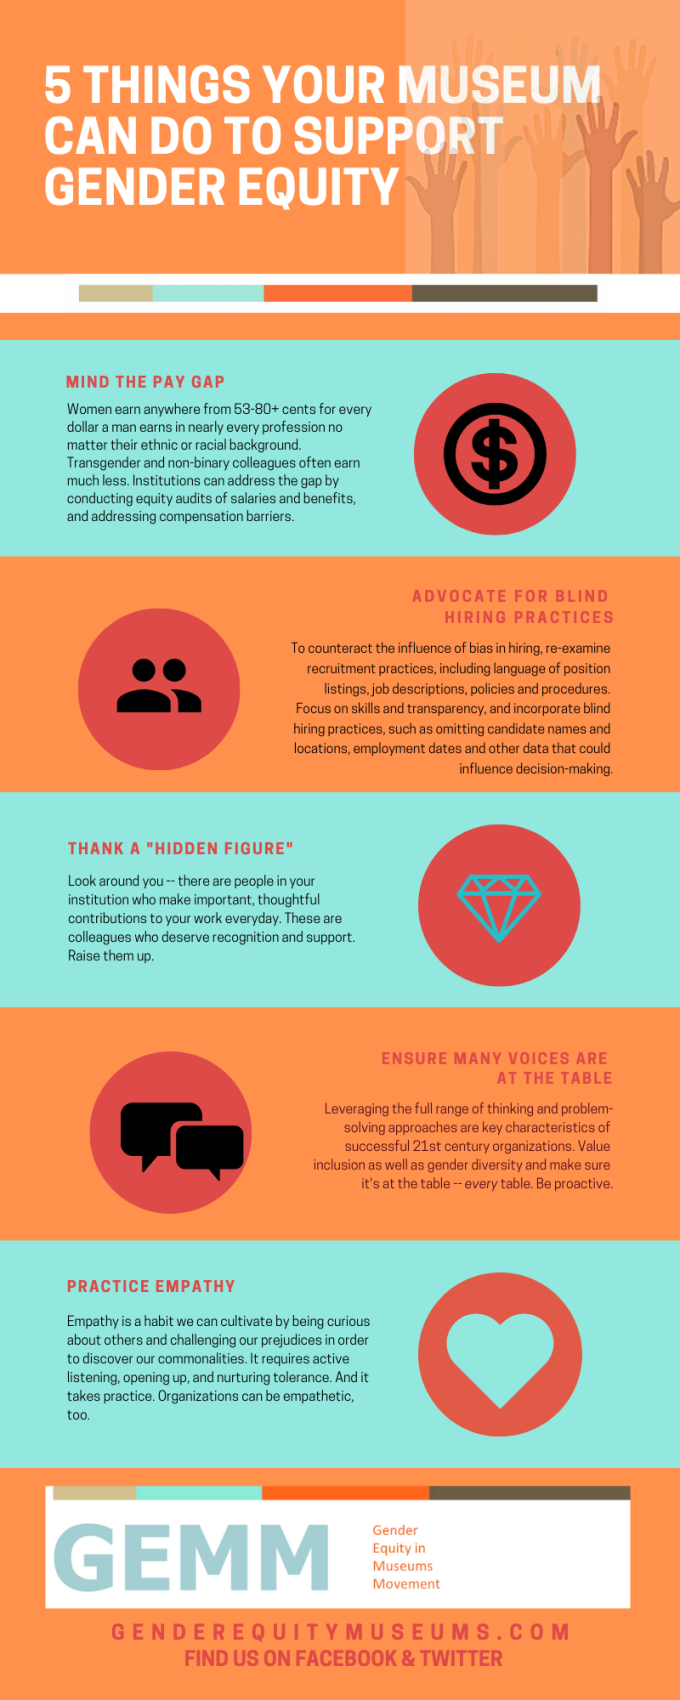 An infographic titled "5 Things Your Museum Can Do to Support Gender Equity." The five things are to "Mind the Pay Gap: Women earn anywhere from 53-80+ cents for every dollar a man earns in nearly every profession no matter their ethnic or racial background. Transgender and non-binary colleagues often earn much less. Institutions can address the gap by conducting equity audits of salaries and benefits, and addressing compensation barriers," "Advocate for Blind Hiring Practices: To counteract the influence of bias in hiring, re-examine recruitment practices, including language of position listings, job descriptions, policies and procedures. Focus on skills and transparency, and incorporate blind hiring practices, such as omitting candidate names and locations, employment dates and other data that could influence decision-making," "Thank a Hidden Figure: Look around you--there are people in your institution who make important, thoughtful contributions to your work everyday. These are colleagues who deserve recognition and support. Raise them up," "Ensure Many Voices Are at the Table: Leveraging the full range of thinking and problem-solving approaches are key characteristics of successful 21st century organizations. Value inclusion as well as gender diversity and make sure it is at the table--<em>every</em> table. Be proactive," and "Practice Empathy: Empathy is a habit we can cultivate by being curious about others and challenging our prejudices in order to discover our commonalities. It requires active listening, opening up, and nurturing tolerance. And it takes practice. Organizations can be empathetic, too." At the bottom is the logo for GEMM, Gender Equity in Museums Movement, a URL to their site at genderequitymuseums.com, and a note to "find us on Facebook and Twitter."